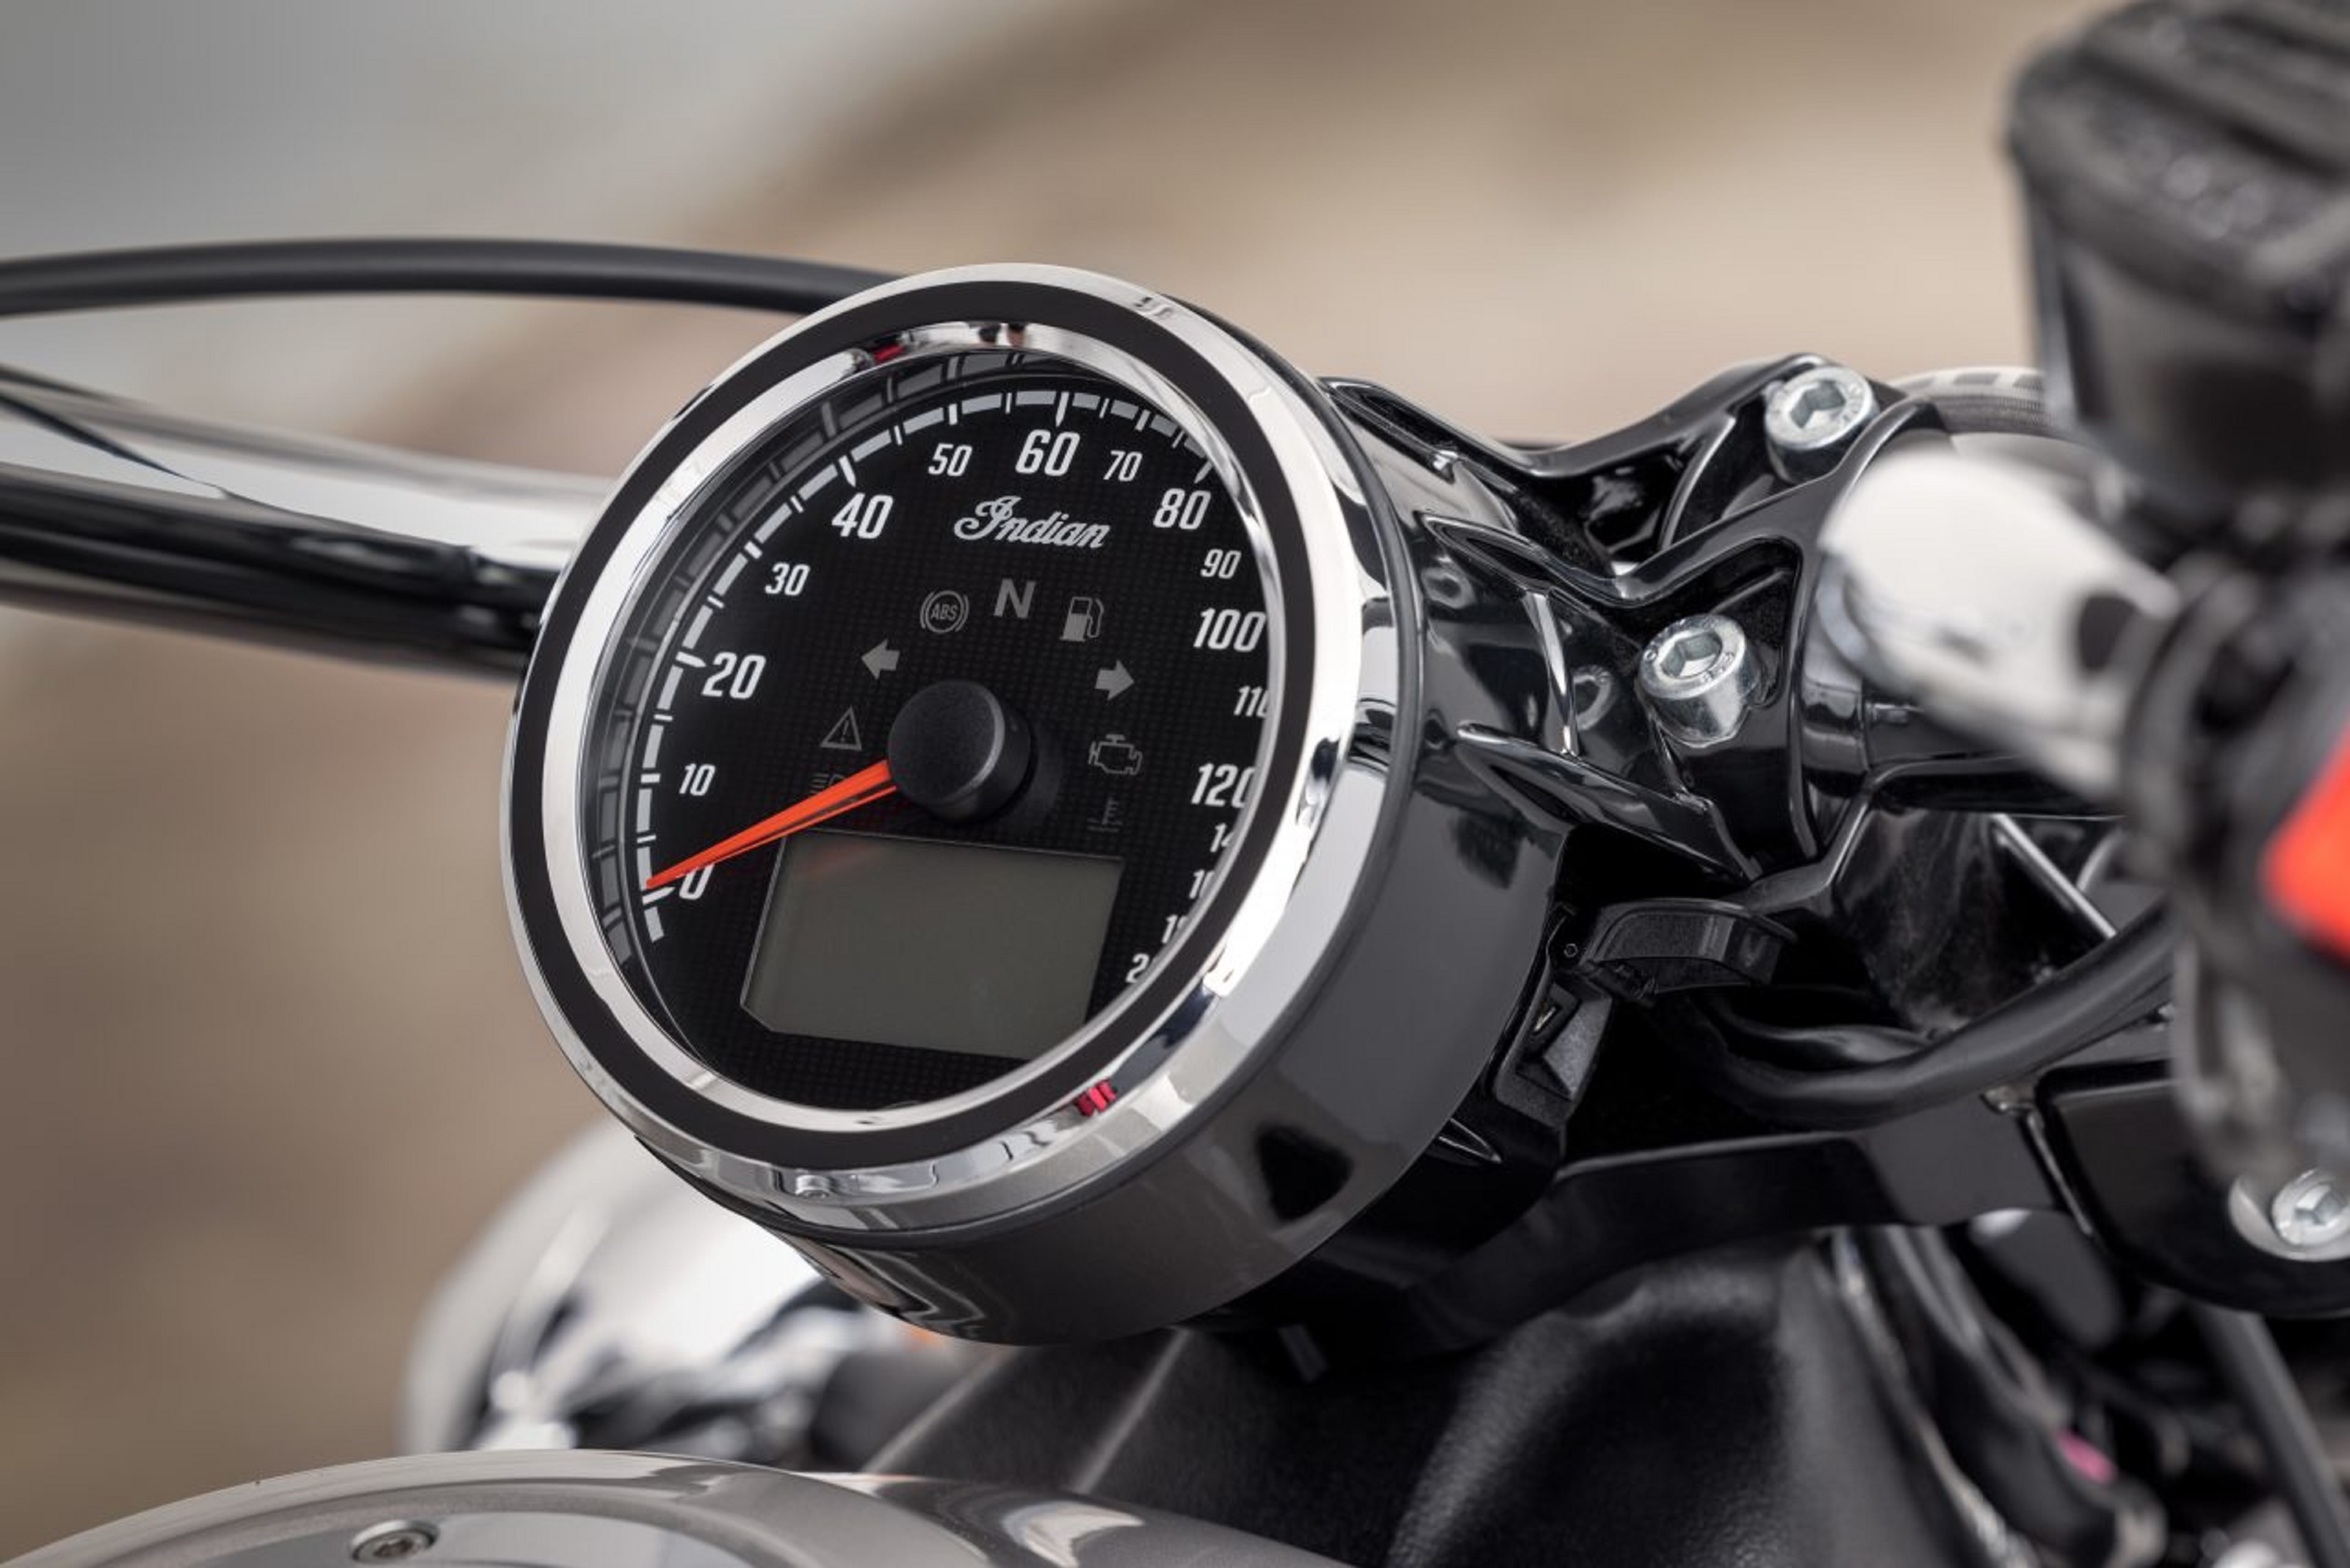 The chrome-rimmed gauge of a 2022 Indian Scout with ABS